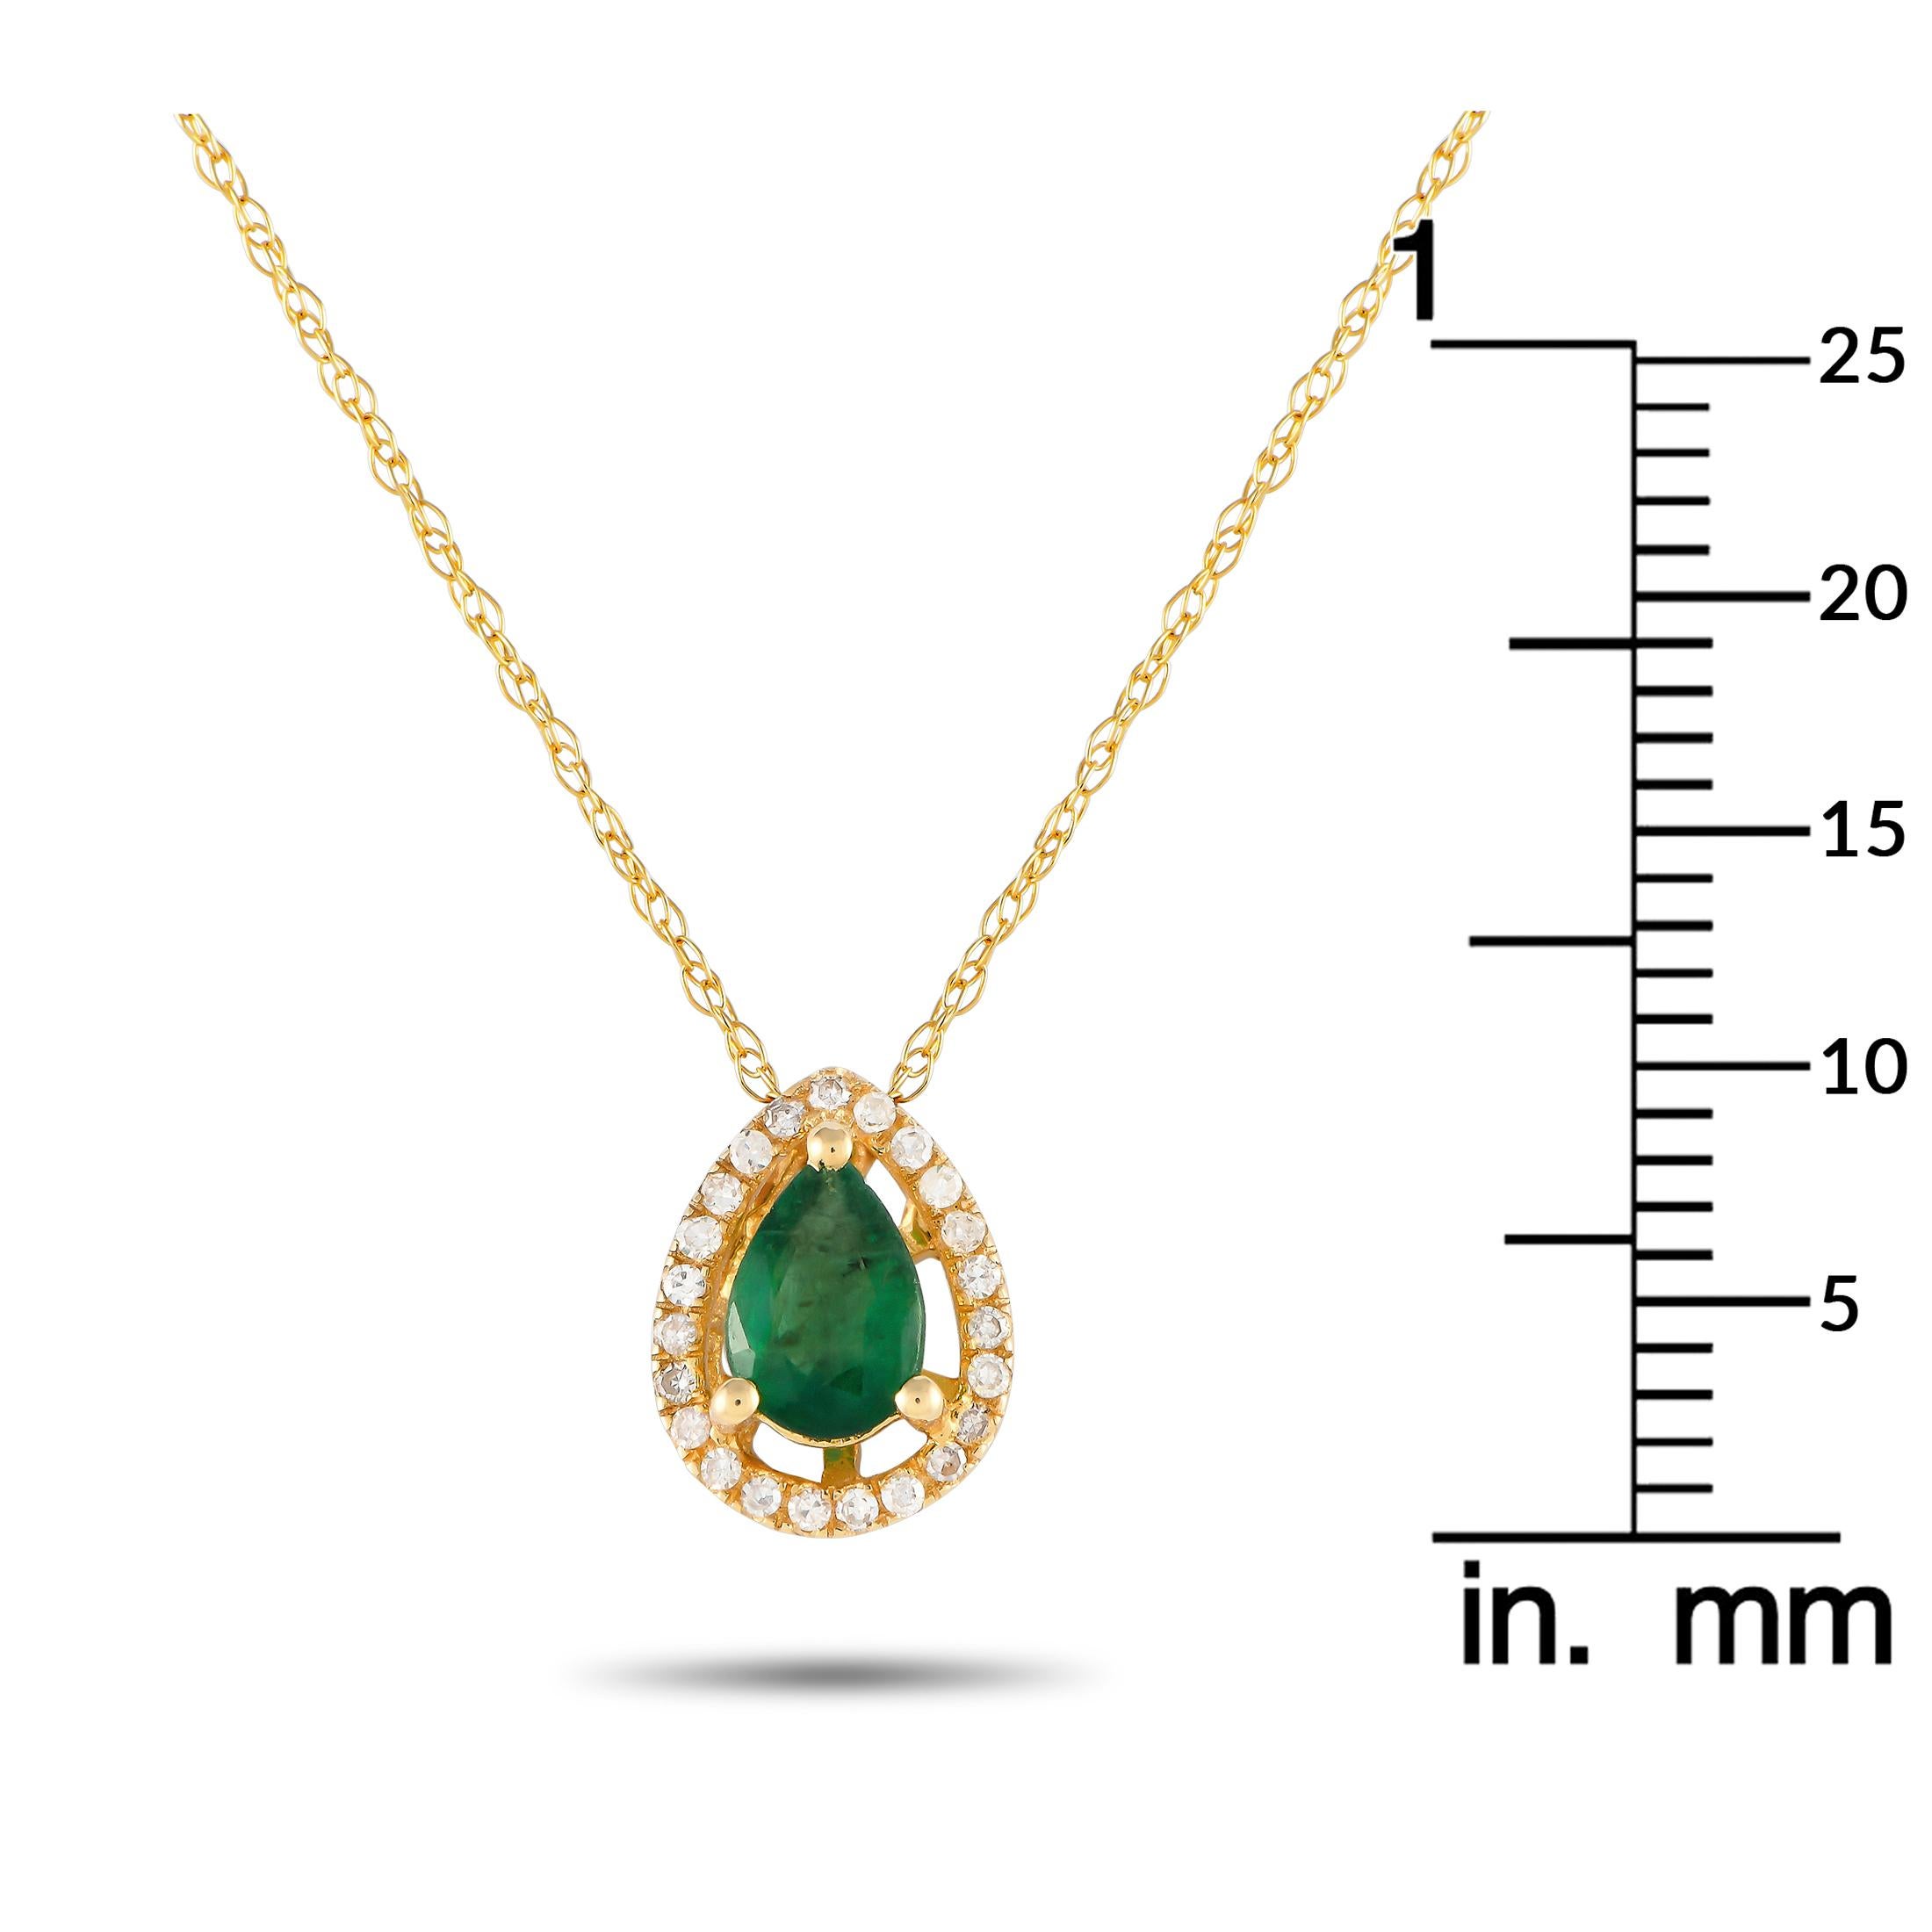 LB Exclusive 14K Yellow Gold 0.07ct Diamond & Emerald Pear Necklace PD4-15949YEM In New Condition For Sale In Southampton, PA